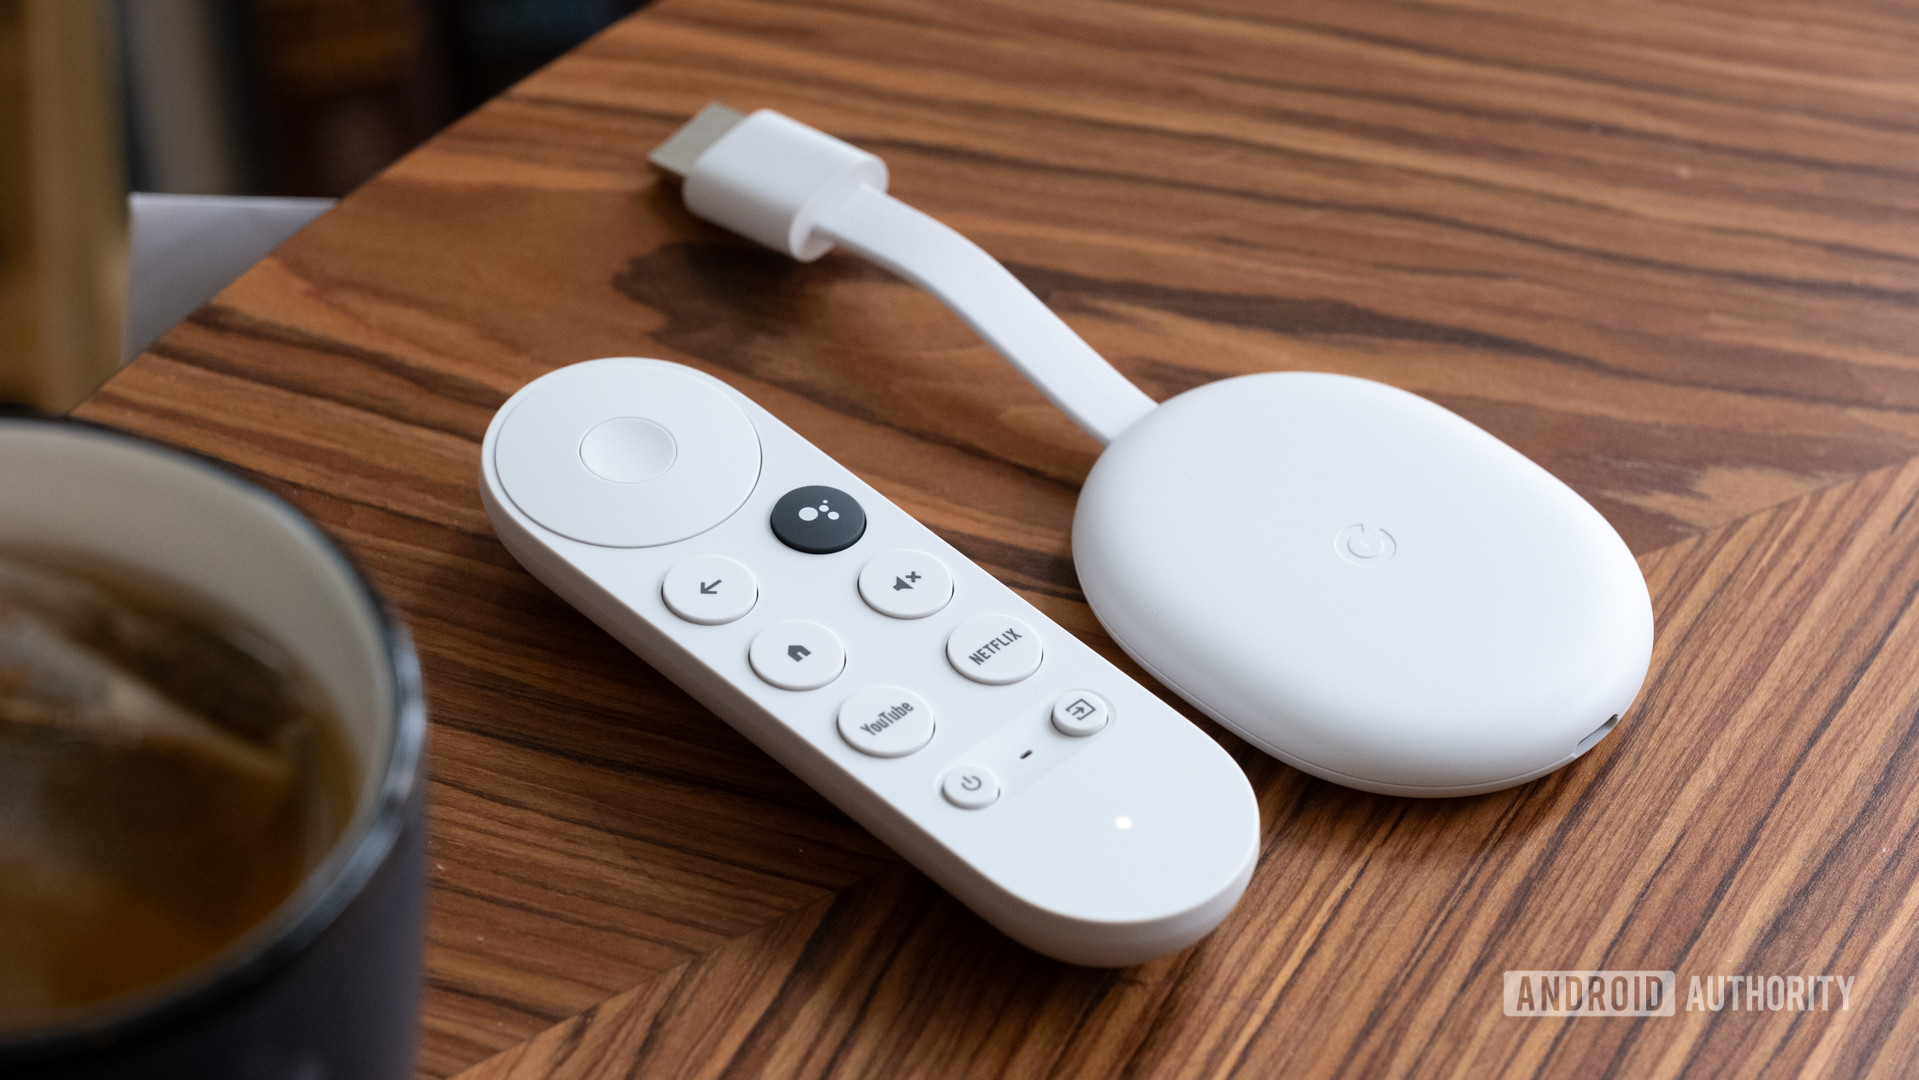 How to use a Chromecast from devices - Android Authority